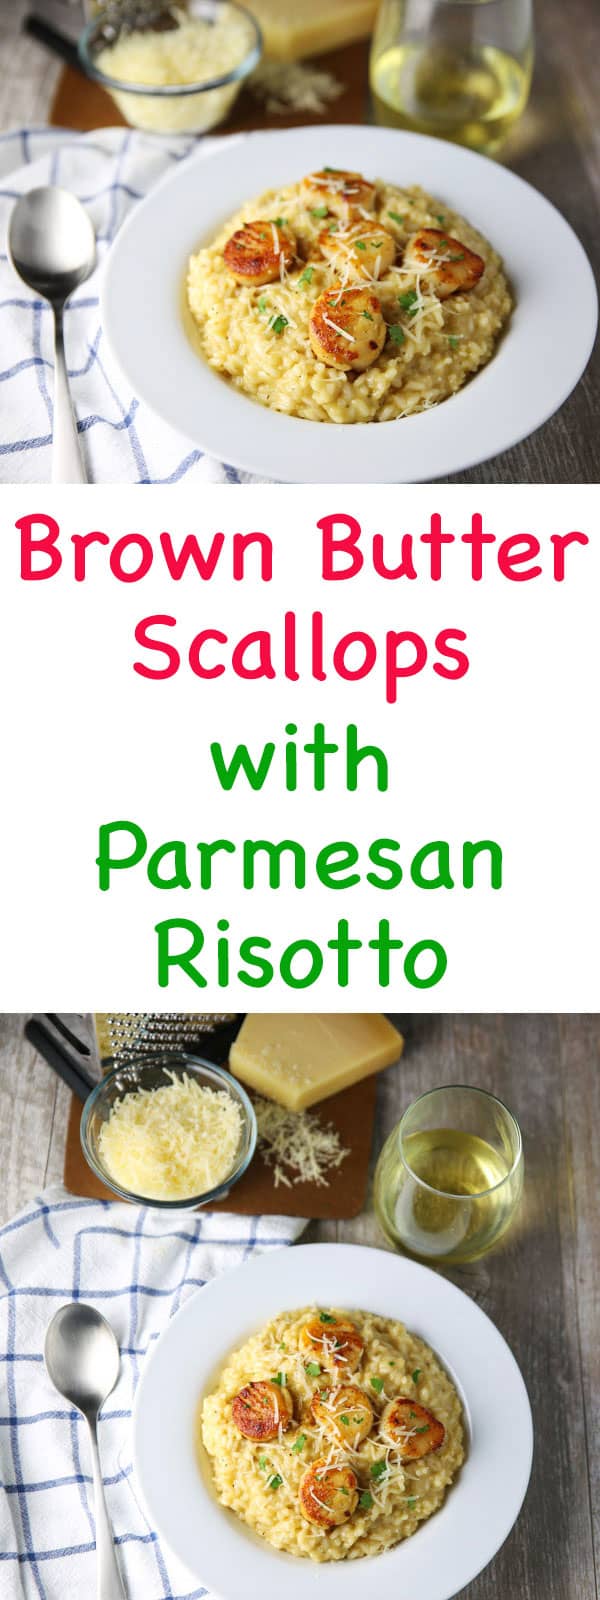 These Brown Butter Scallops with Parmesan Risotto dish are so luscious, creamy, and totally satisfying! Perfect for a date night at home!